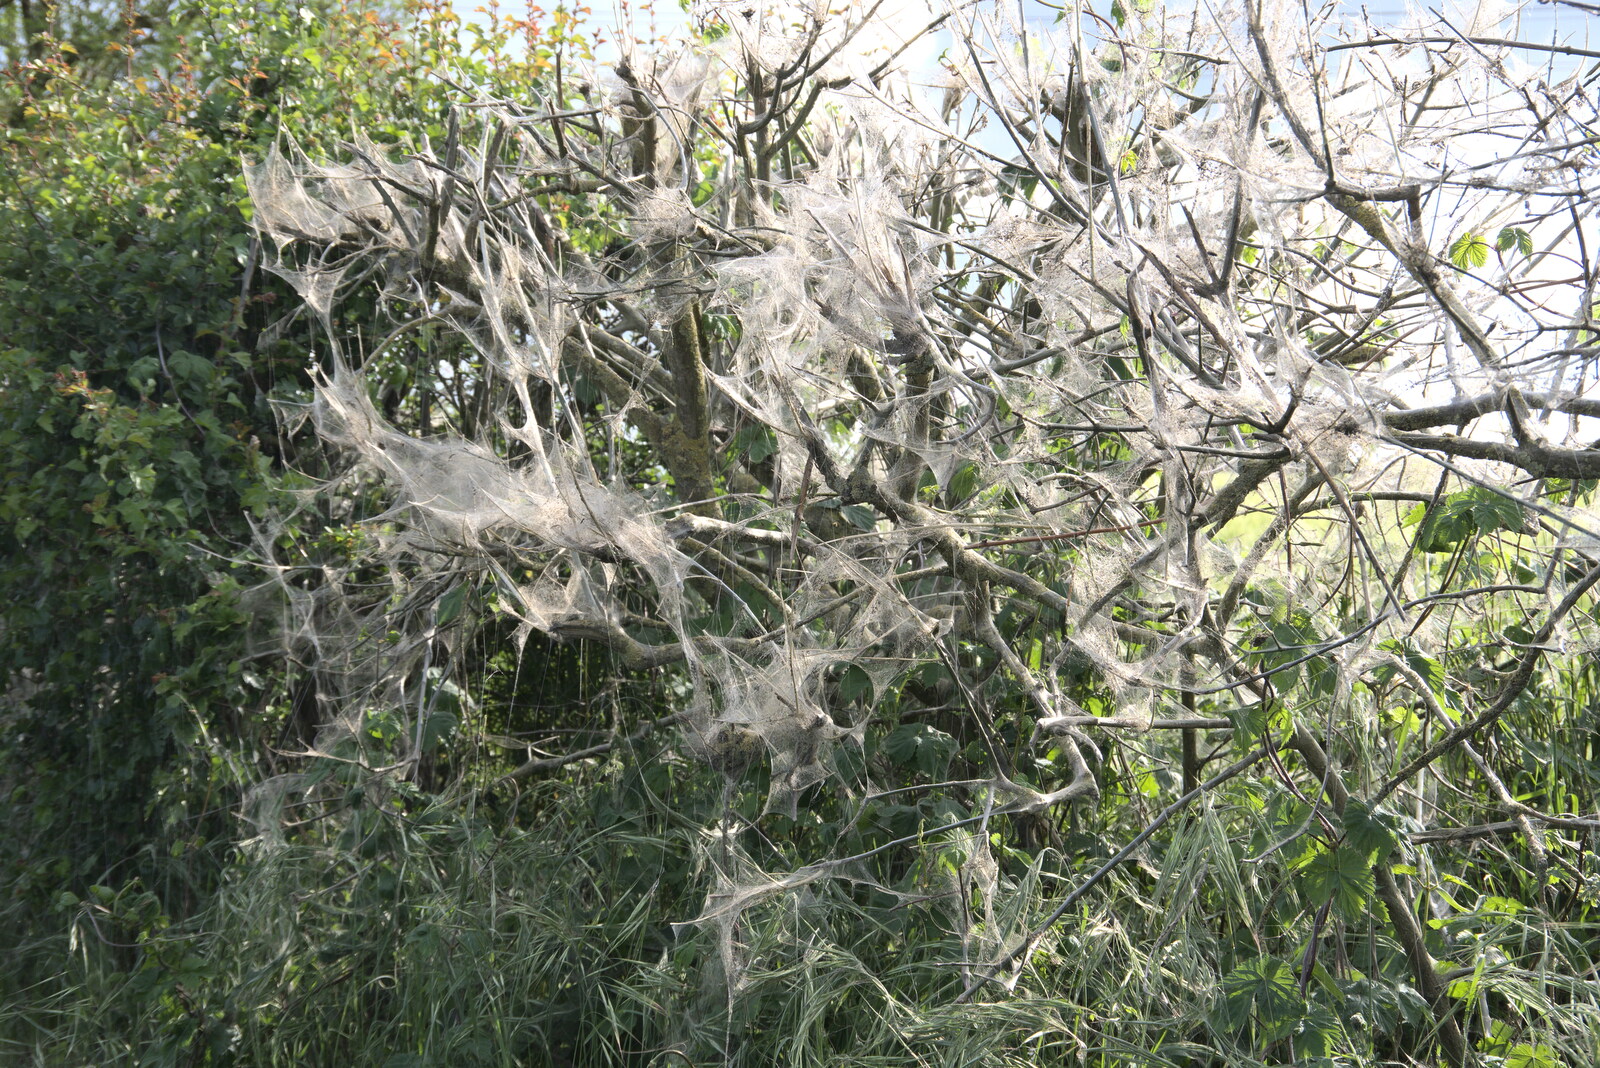 More of the famous caterpillar cobwebs from A Moth Infestation and a Trip to the Zoo, Banham, Norfolk - 21st May 2022